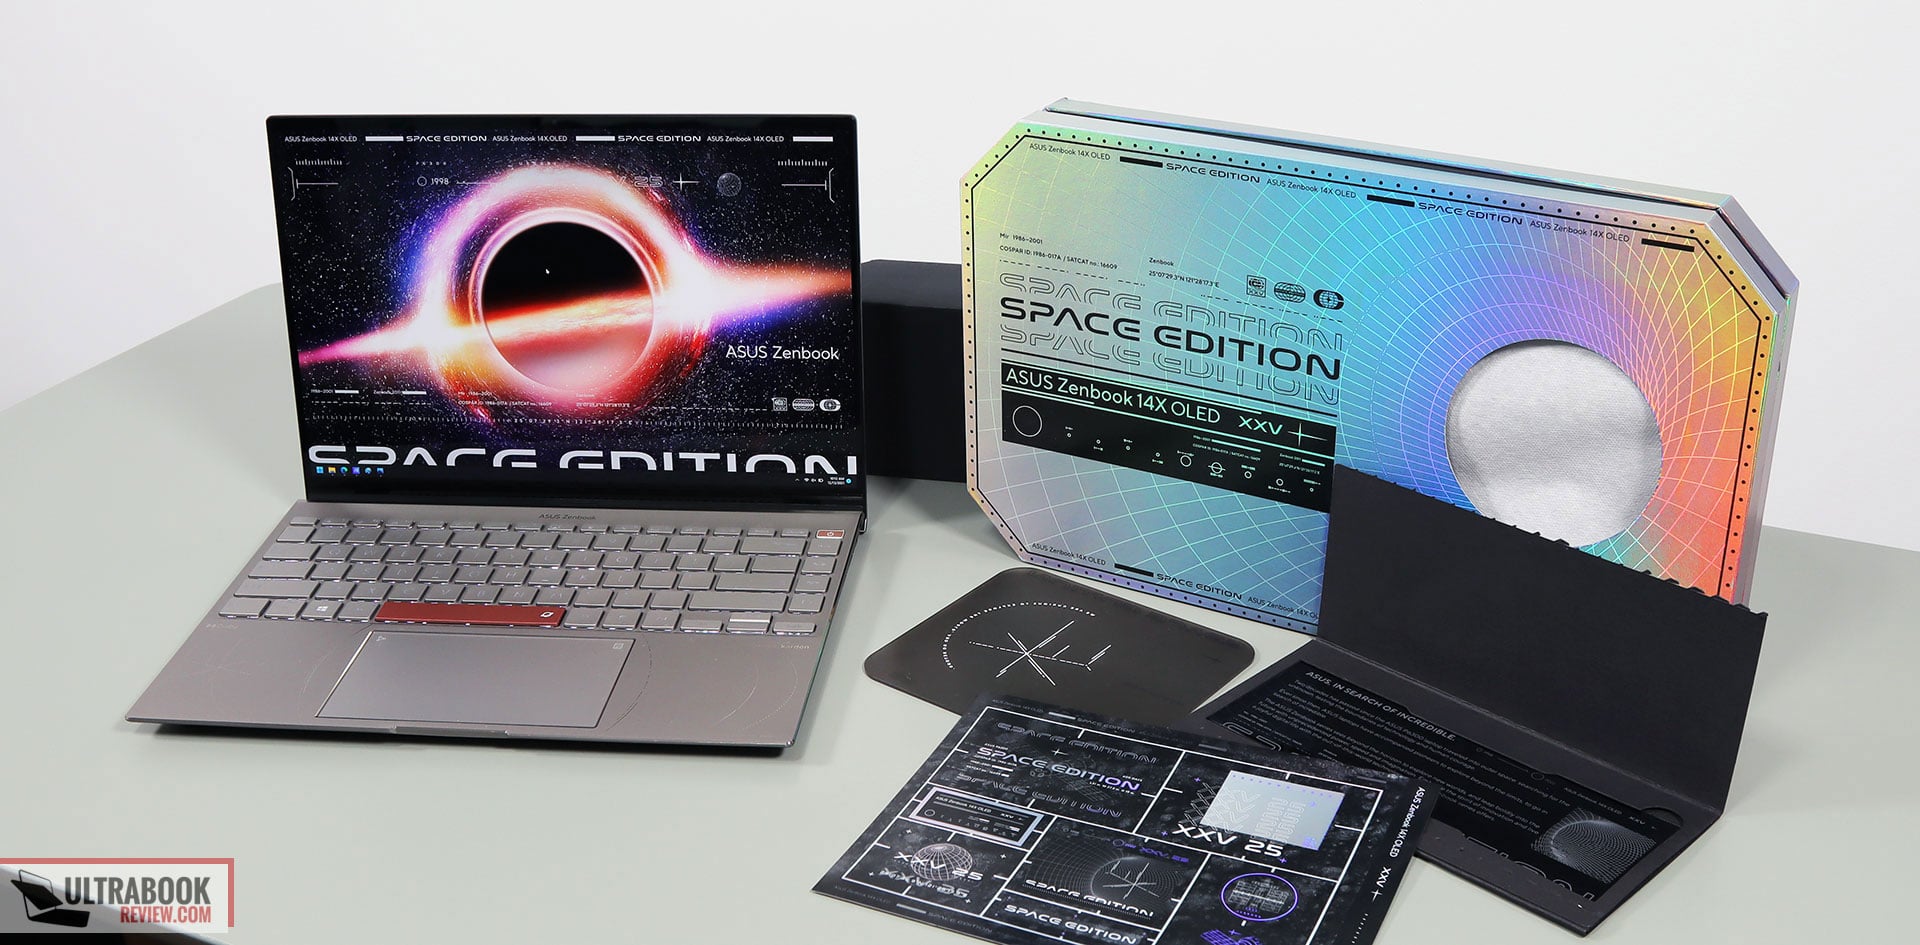 asus zenbook space edition1